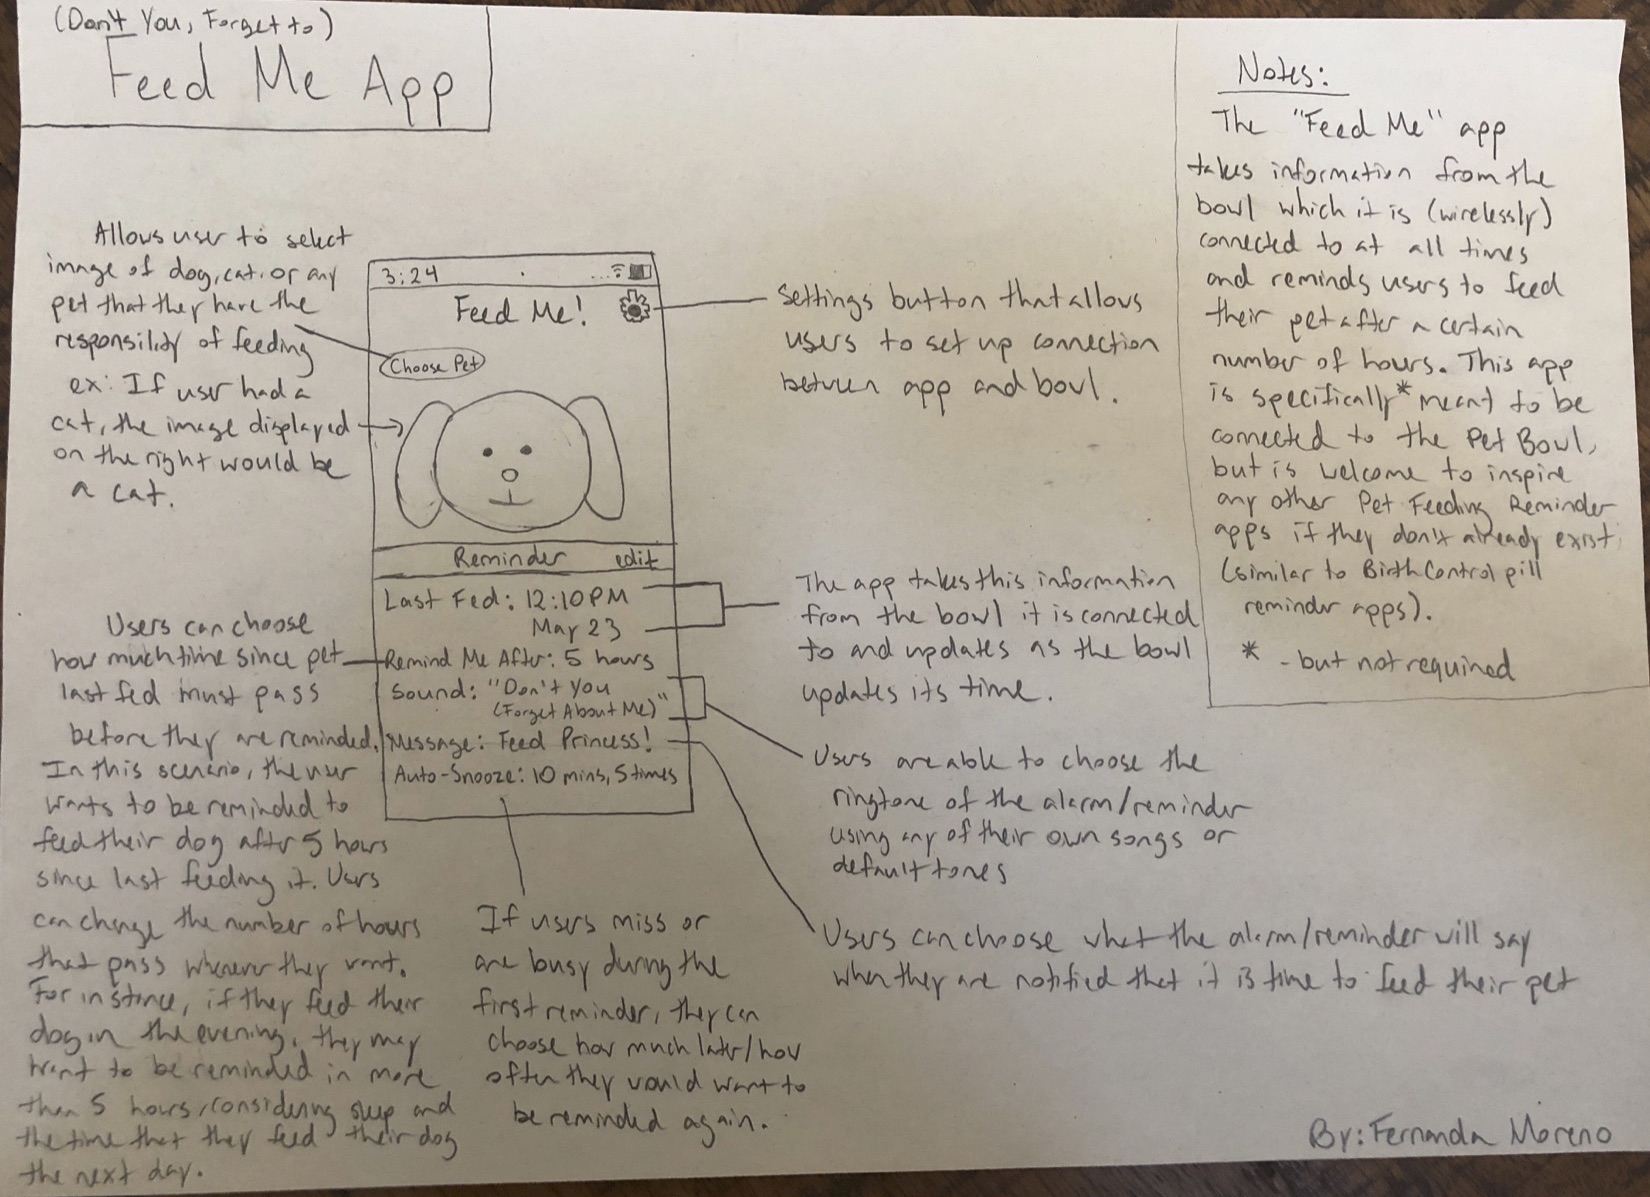 Sketch of app layout and functionality description